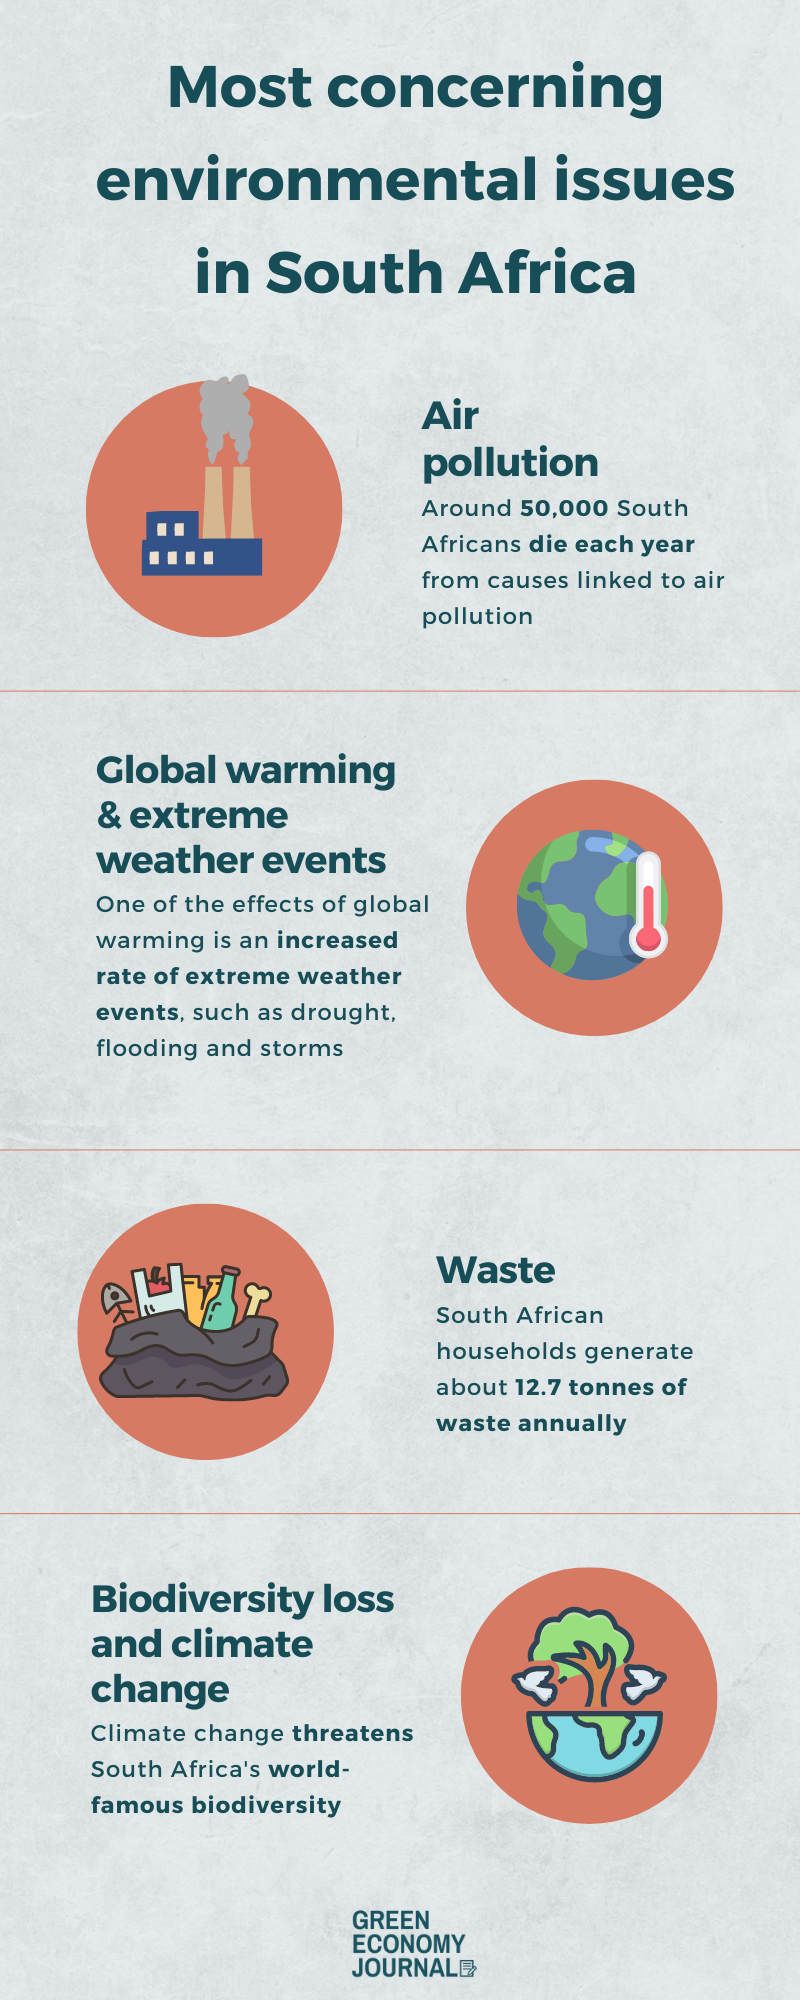 Most concerning environmental issues in South Africa